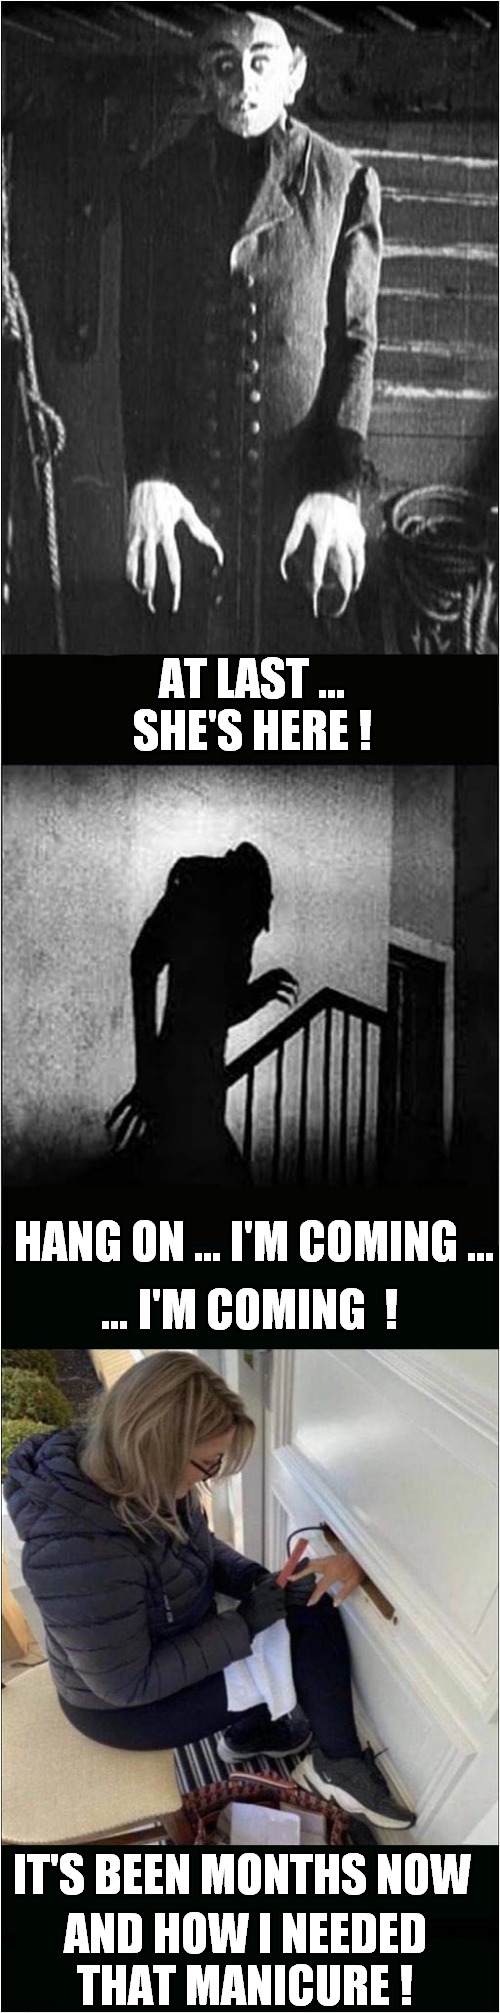 Now That's An Entrepreneur ! | AT LAST … SHE'S HERE ! HANG ON ... I'M COMING ... … I'M COMING  ! IT'S BEEN MONTHS NOW; AND HOW I NEEDED THAT MANICURE ! | image tagged in fun,covid,entrepreneur,nosferatu | made w/ Imgflip meme maker